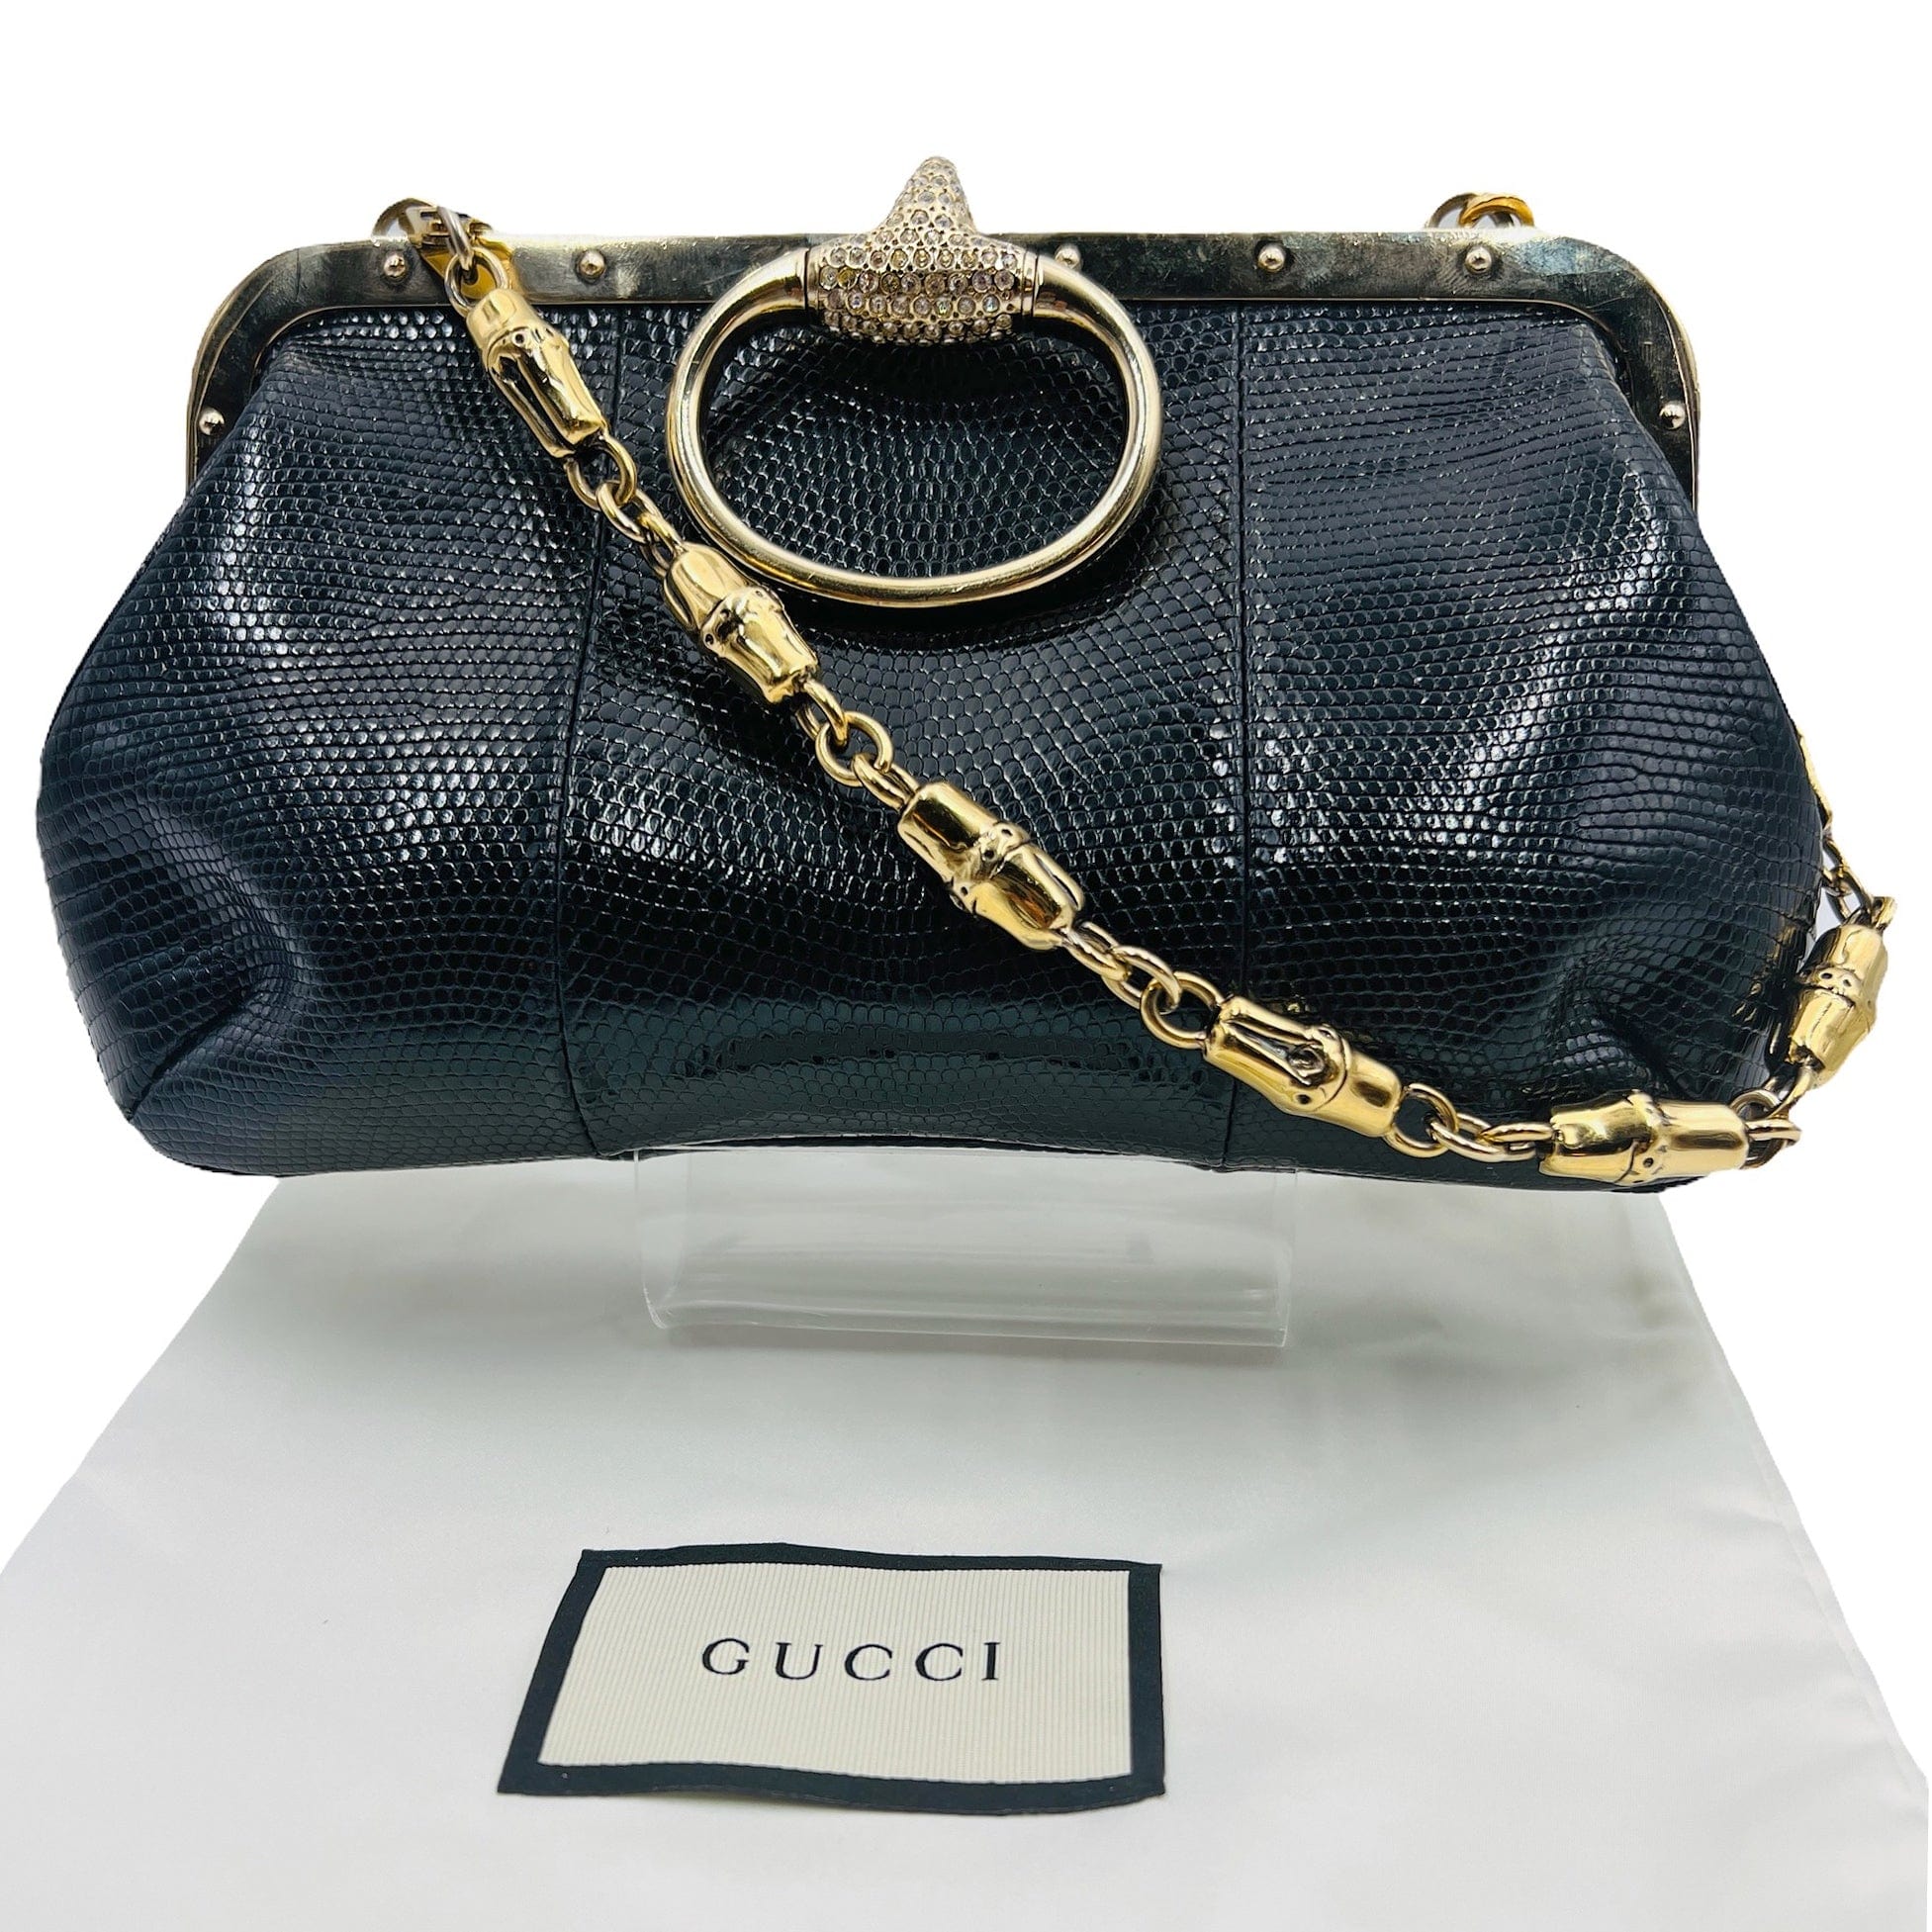 Gucci Collectible Vintage Tom Ford Designed Lizard Leather Bag